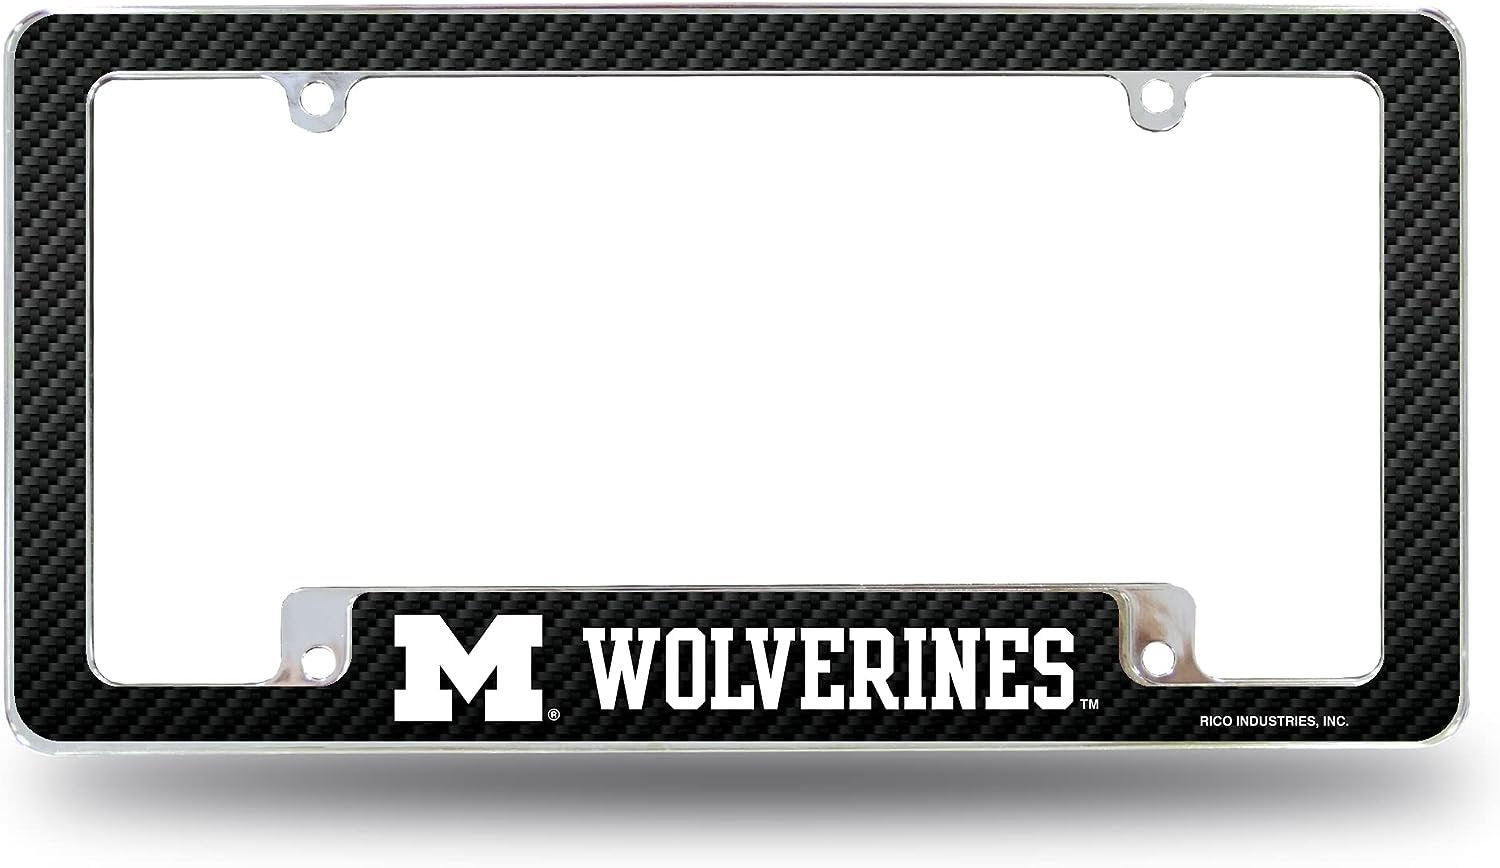 University of Michigan Wolverines Metal License Plate Frame Chrome Tag Cover 12x6 Inch Carbon Fiber Design